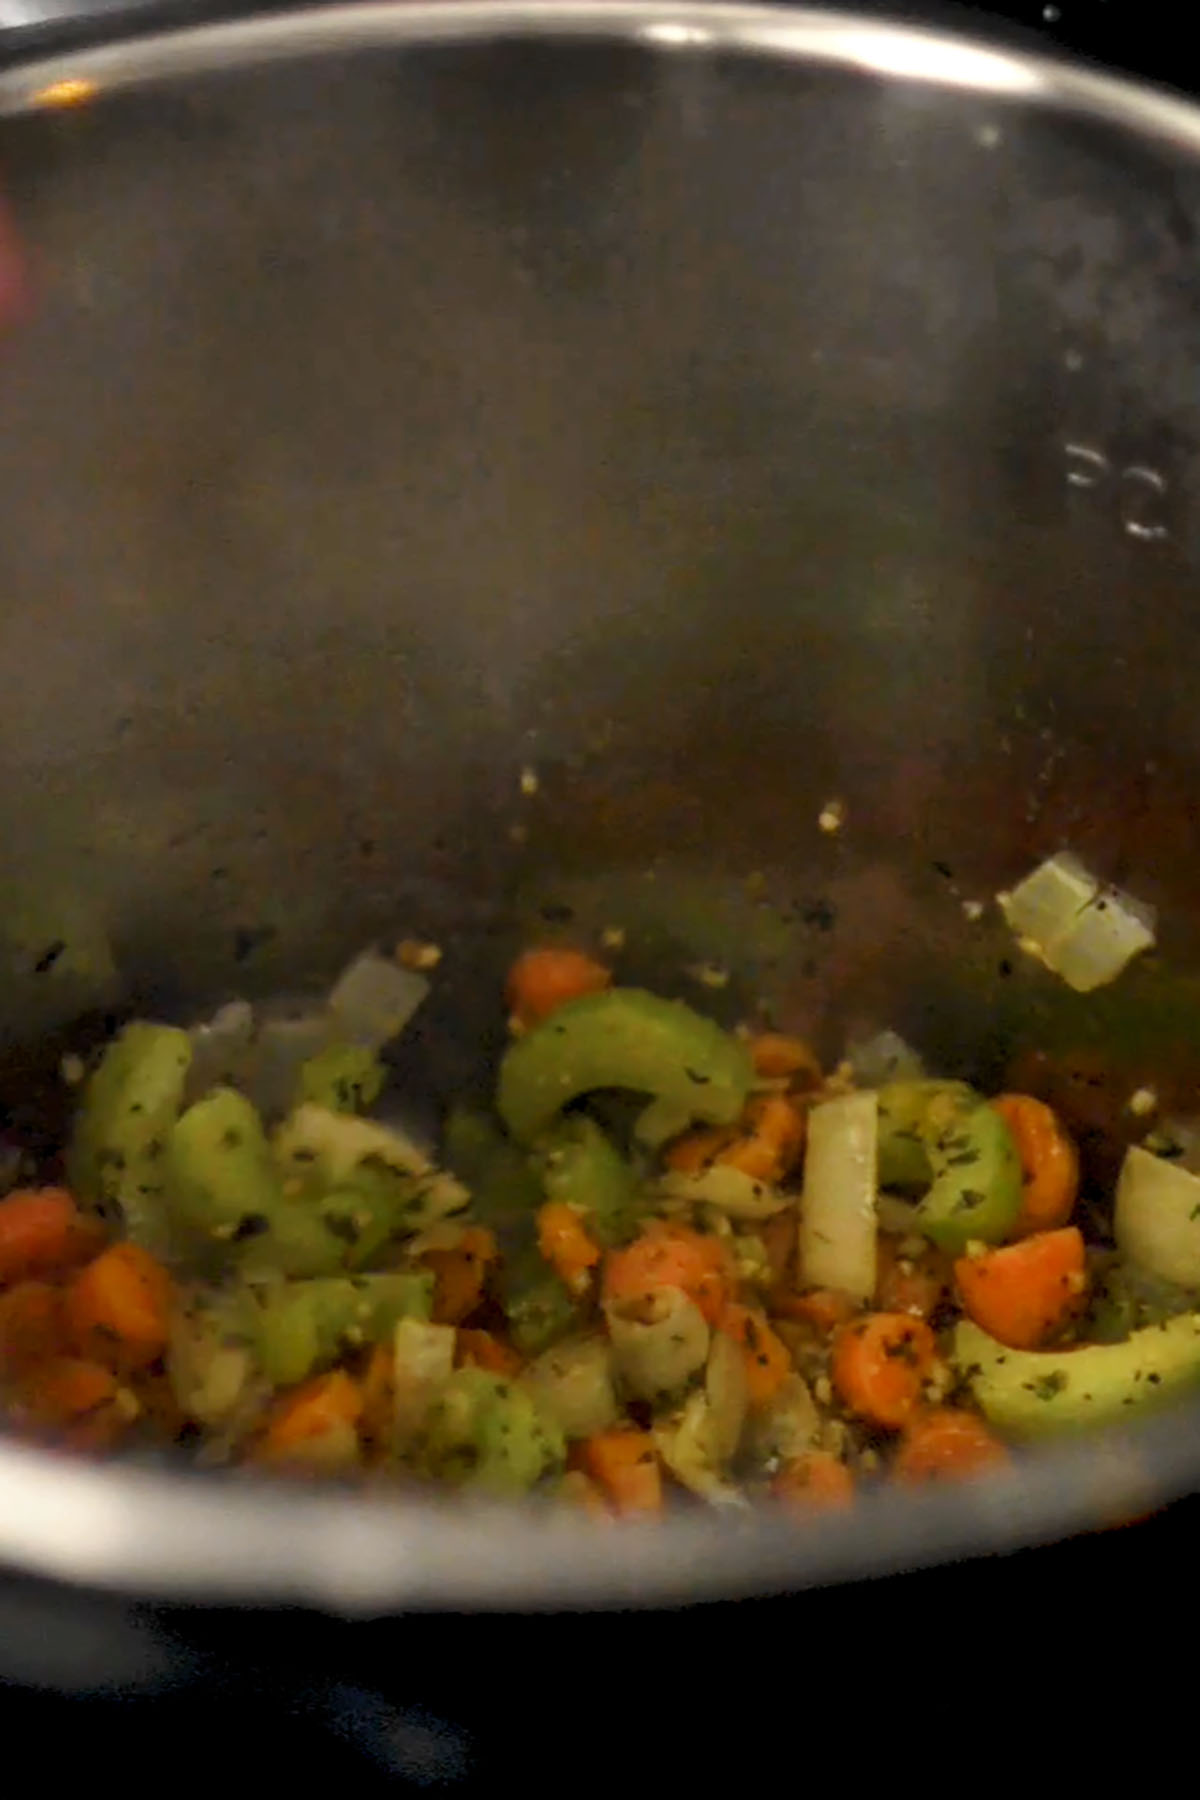 Seasoning added to sautéd vegetables in an Instant Pot.